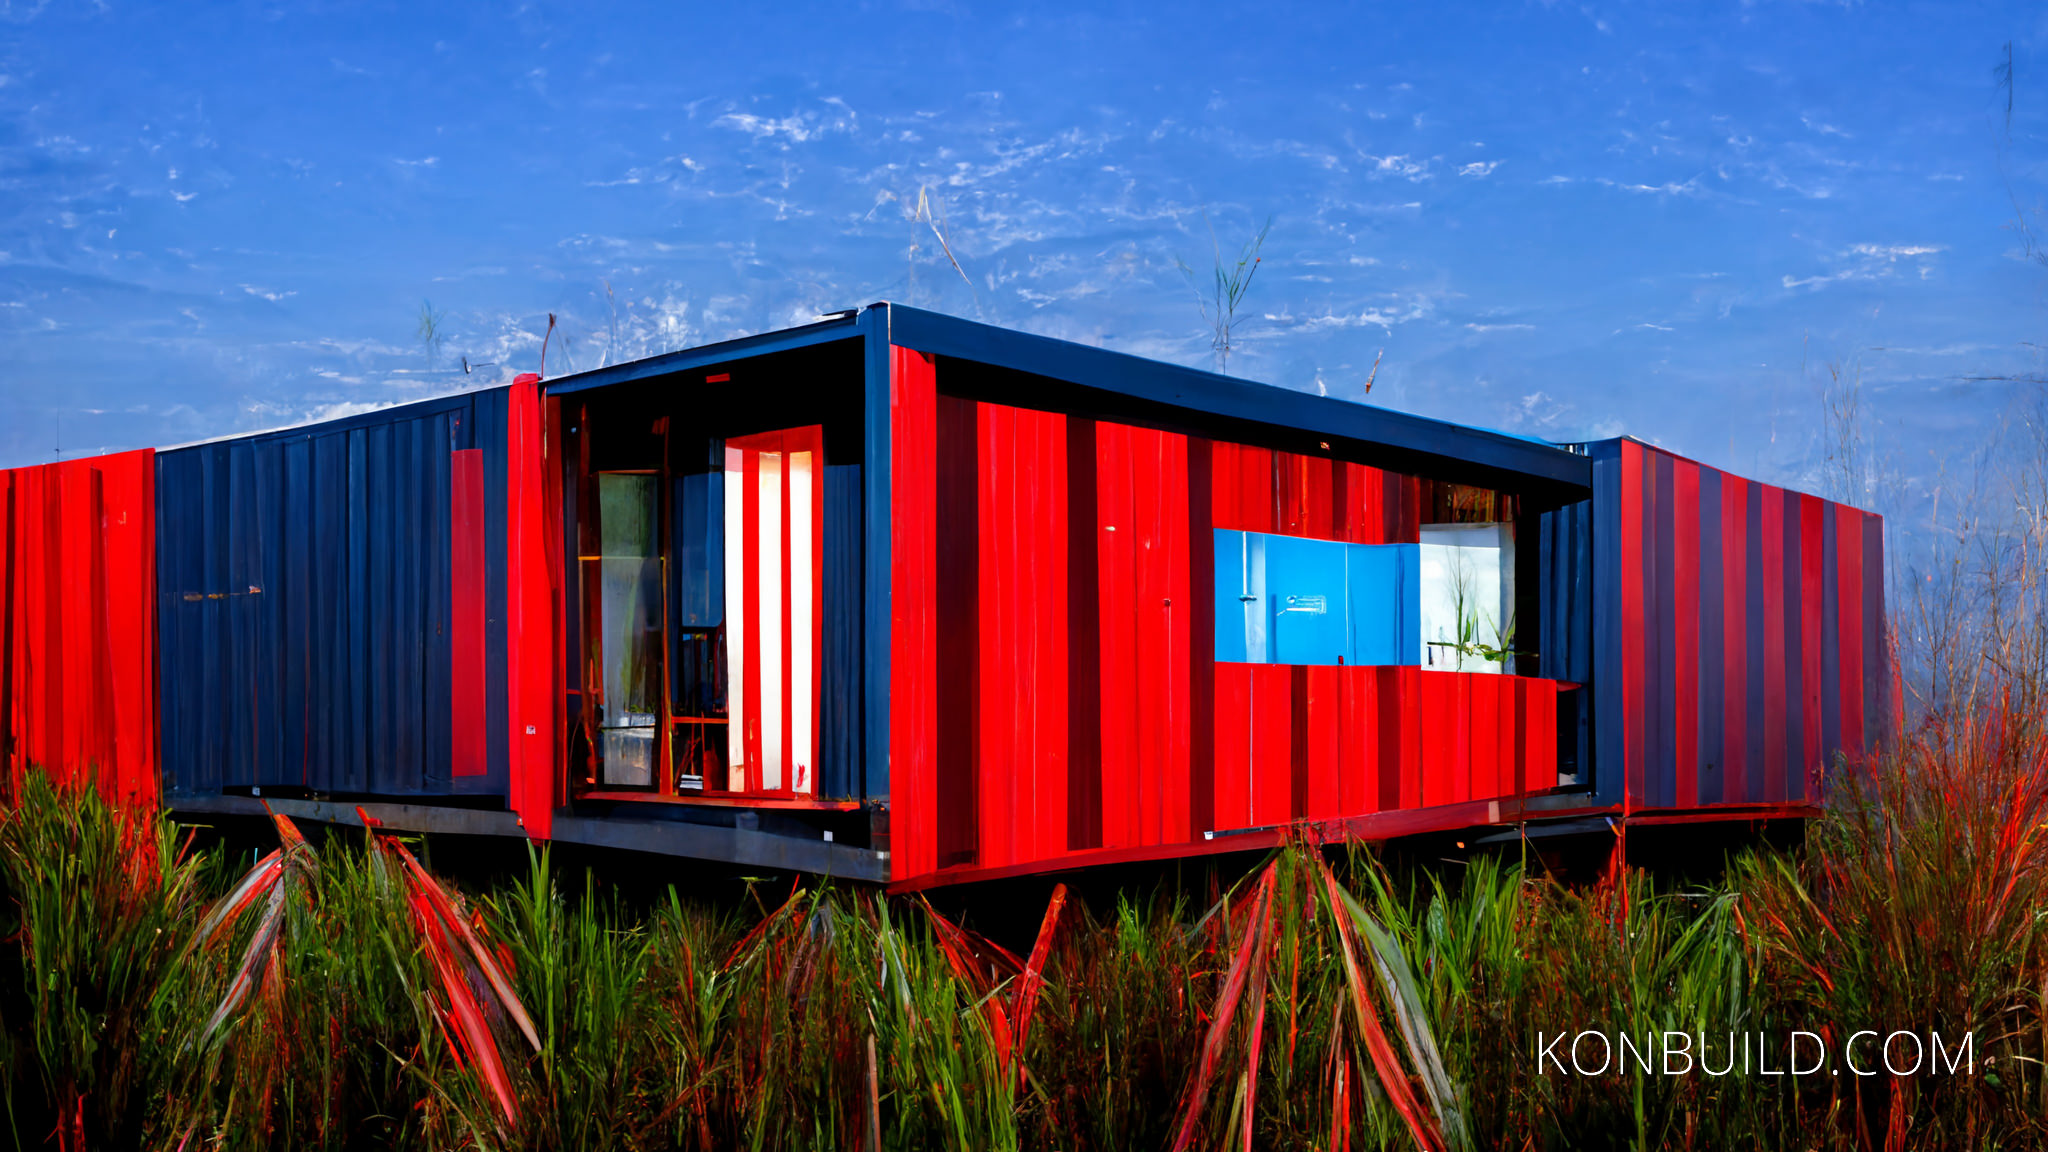 A red and blue container home built over a swamp.